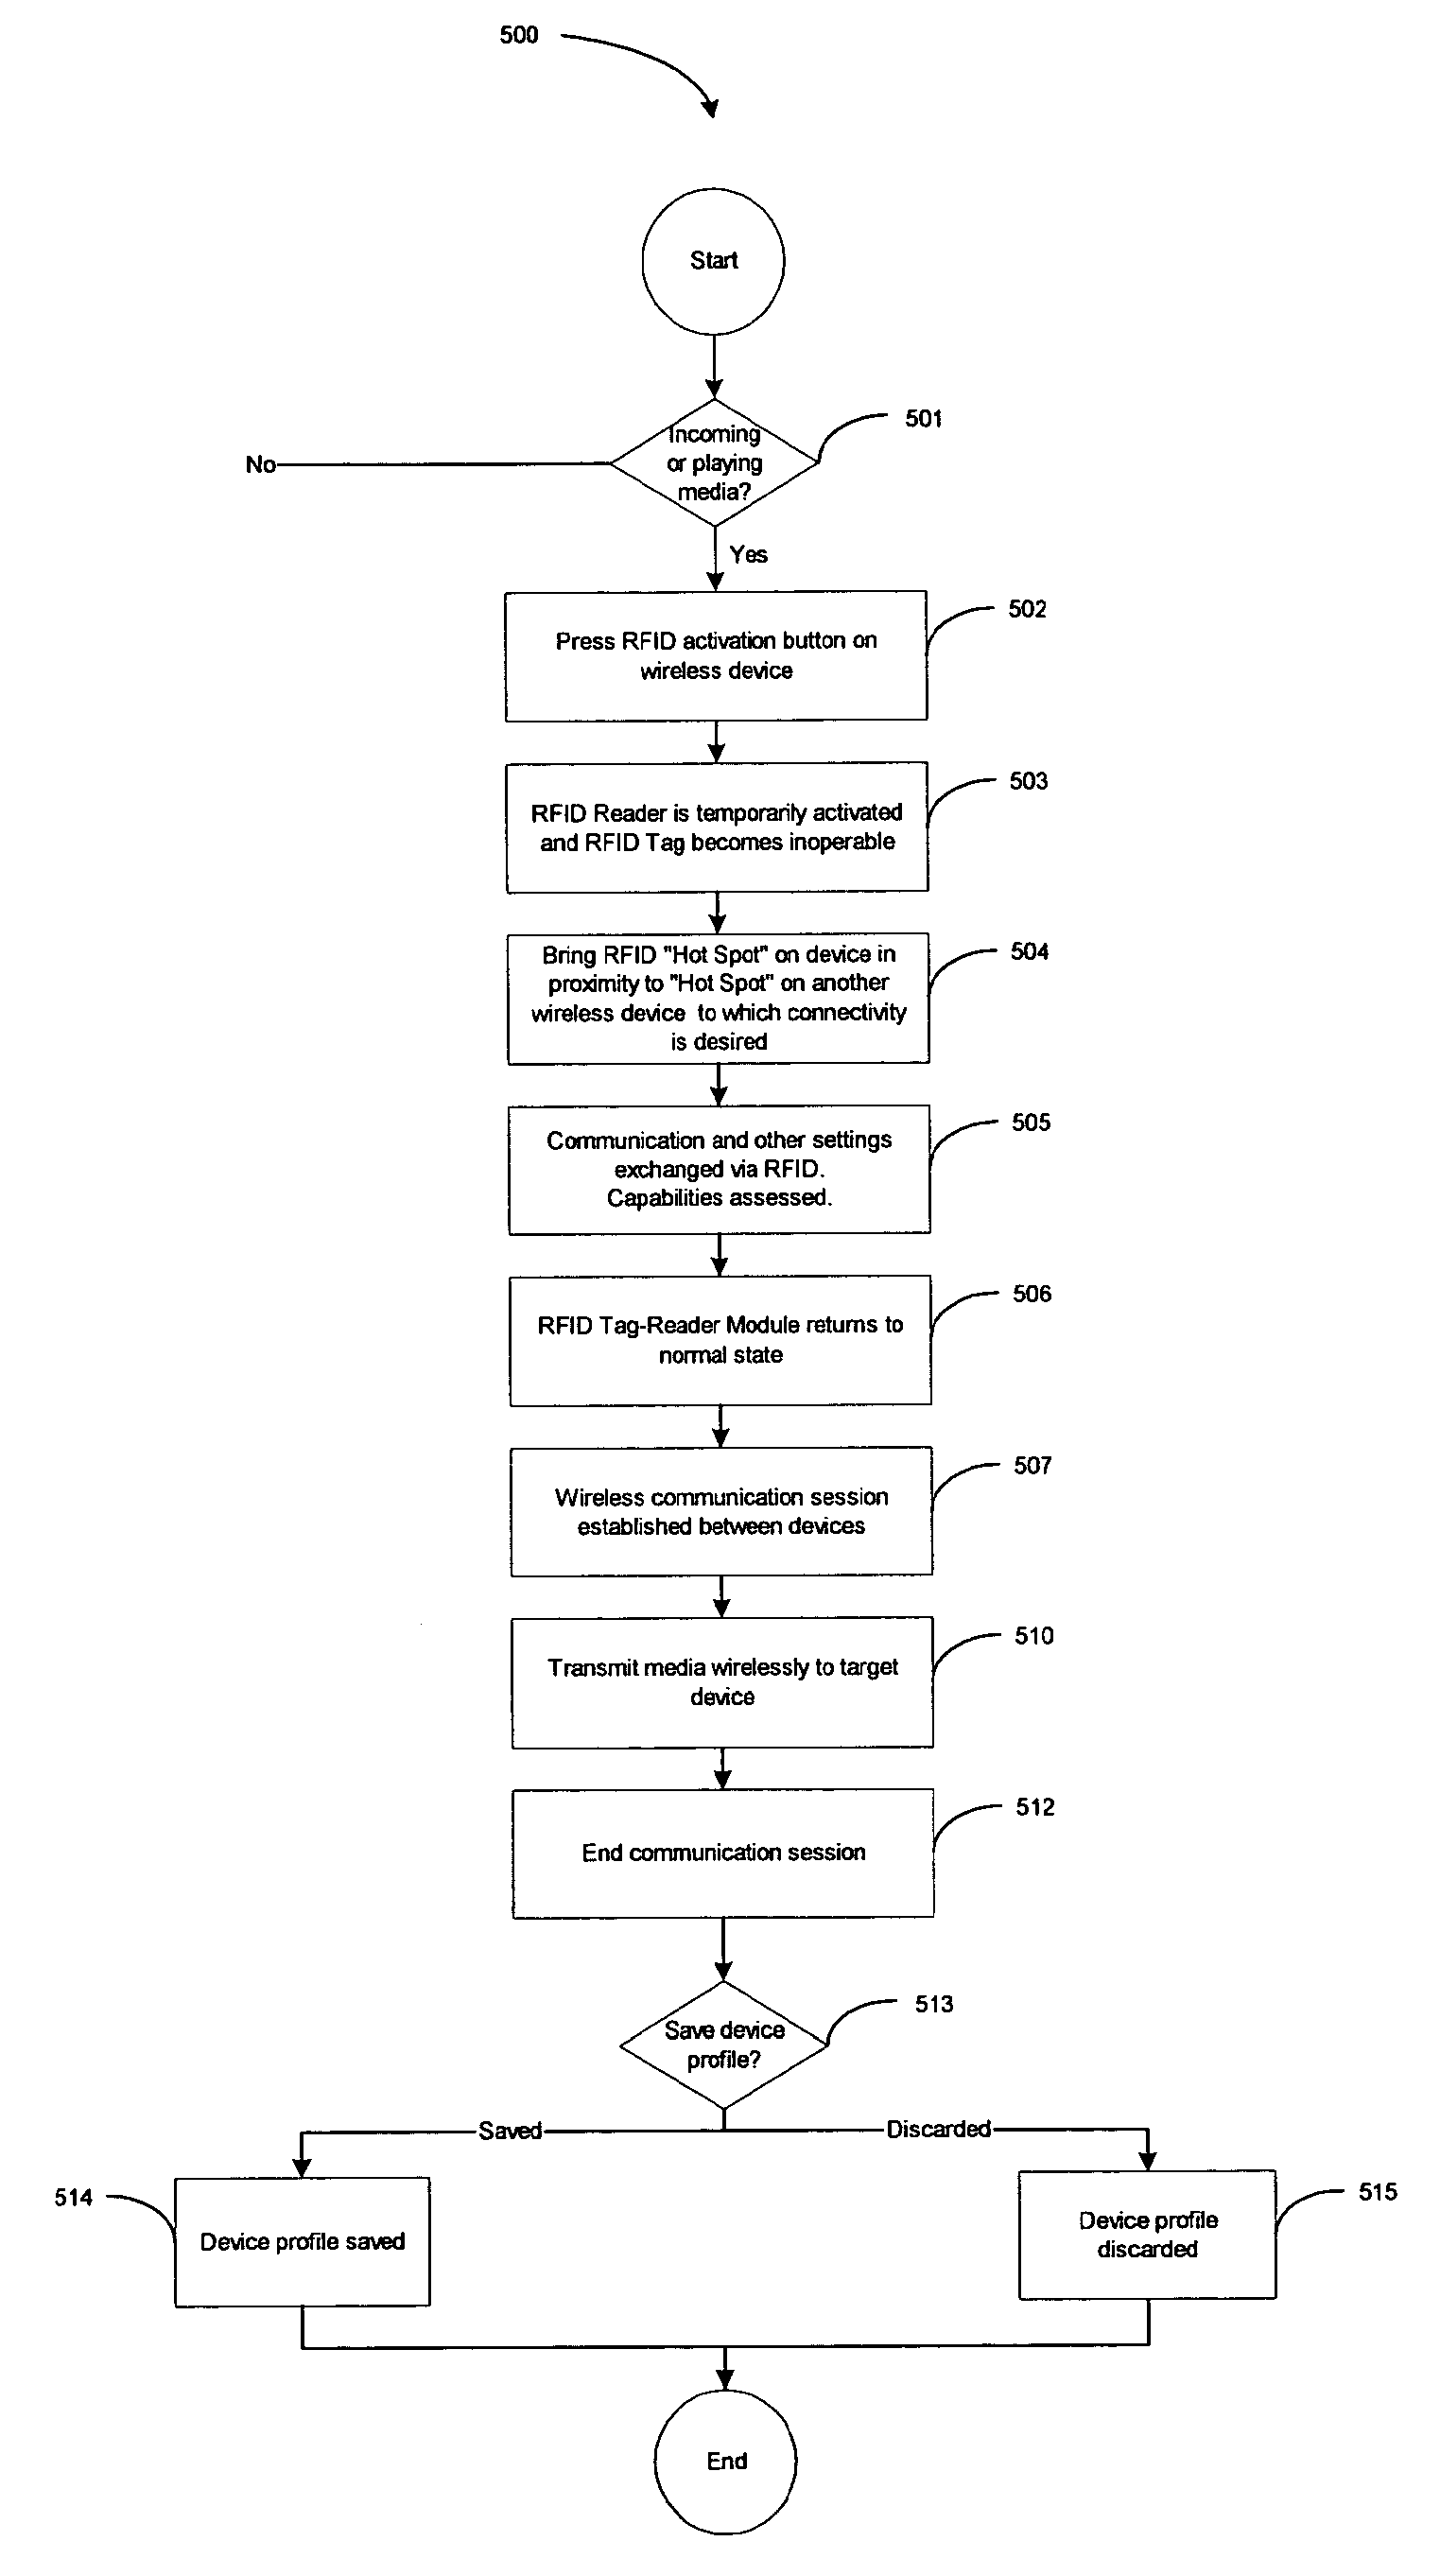 Wireless inter-device data processing configured through inter-device transmitted data